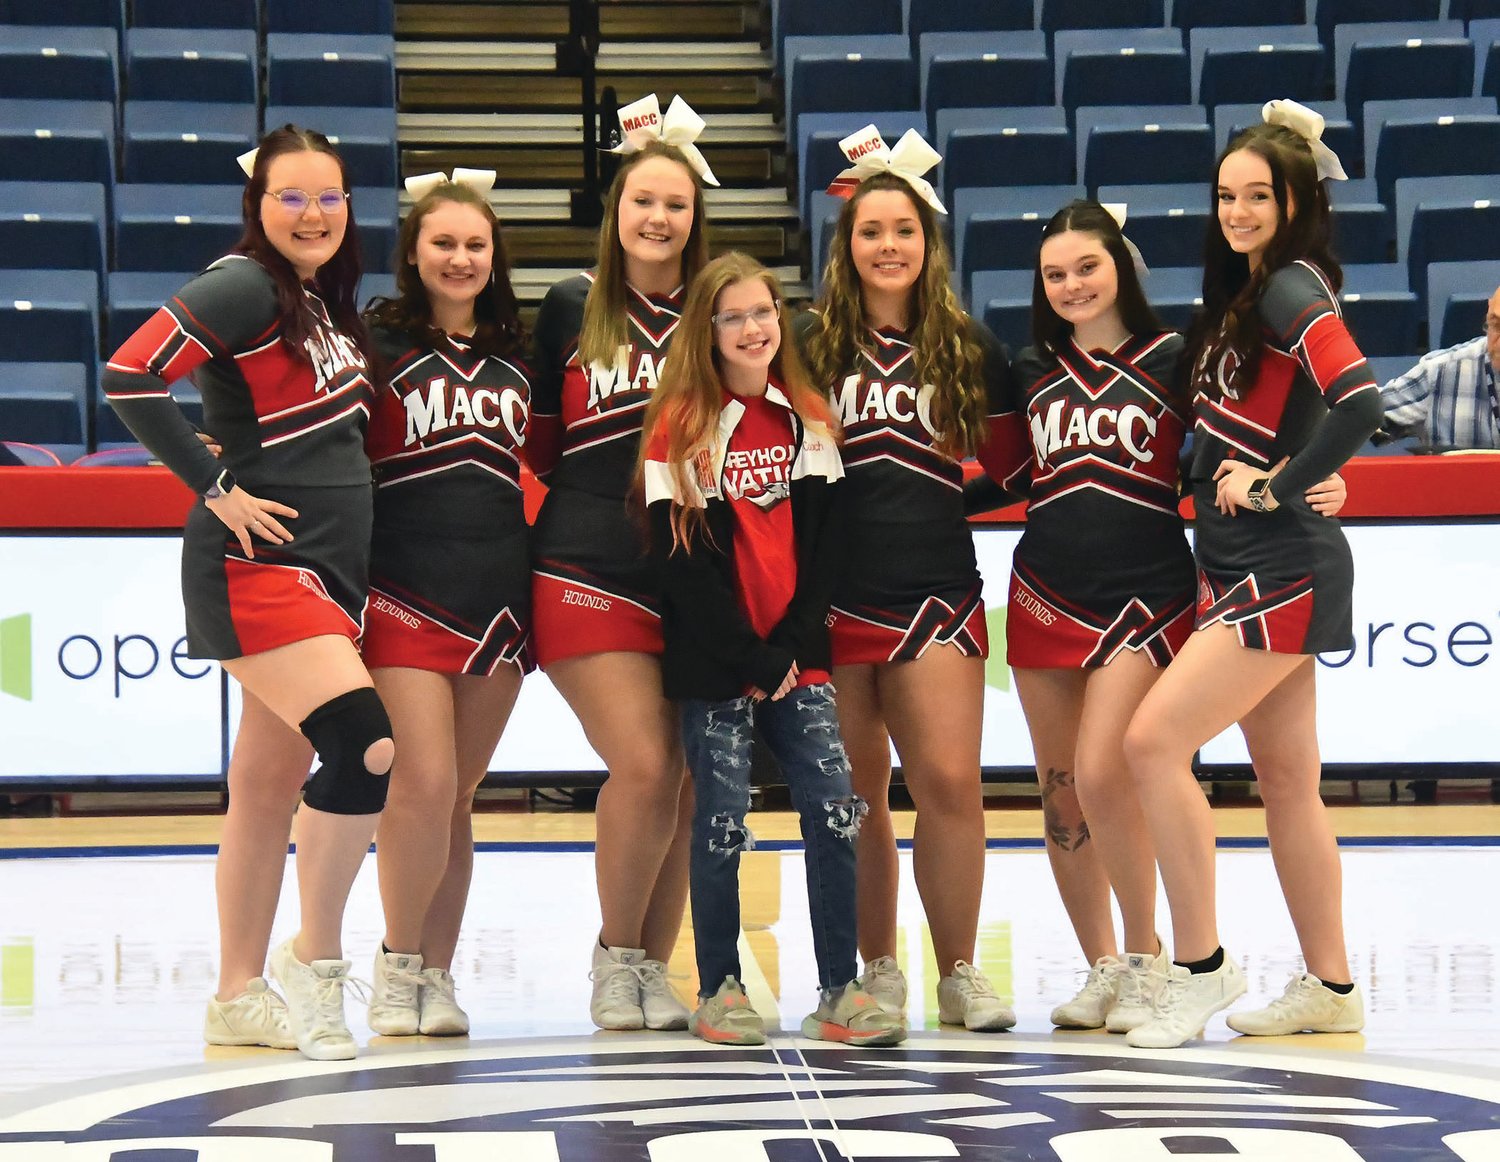 The Moberly Area Community College cheerleading squad participated in the national tournament.